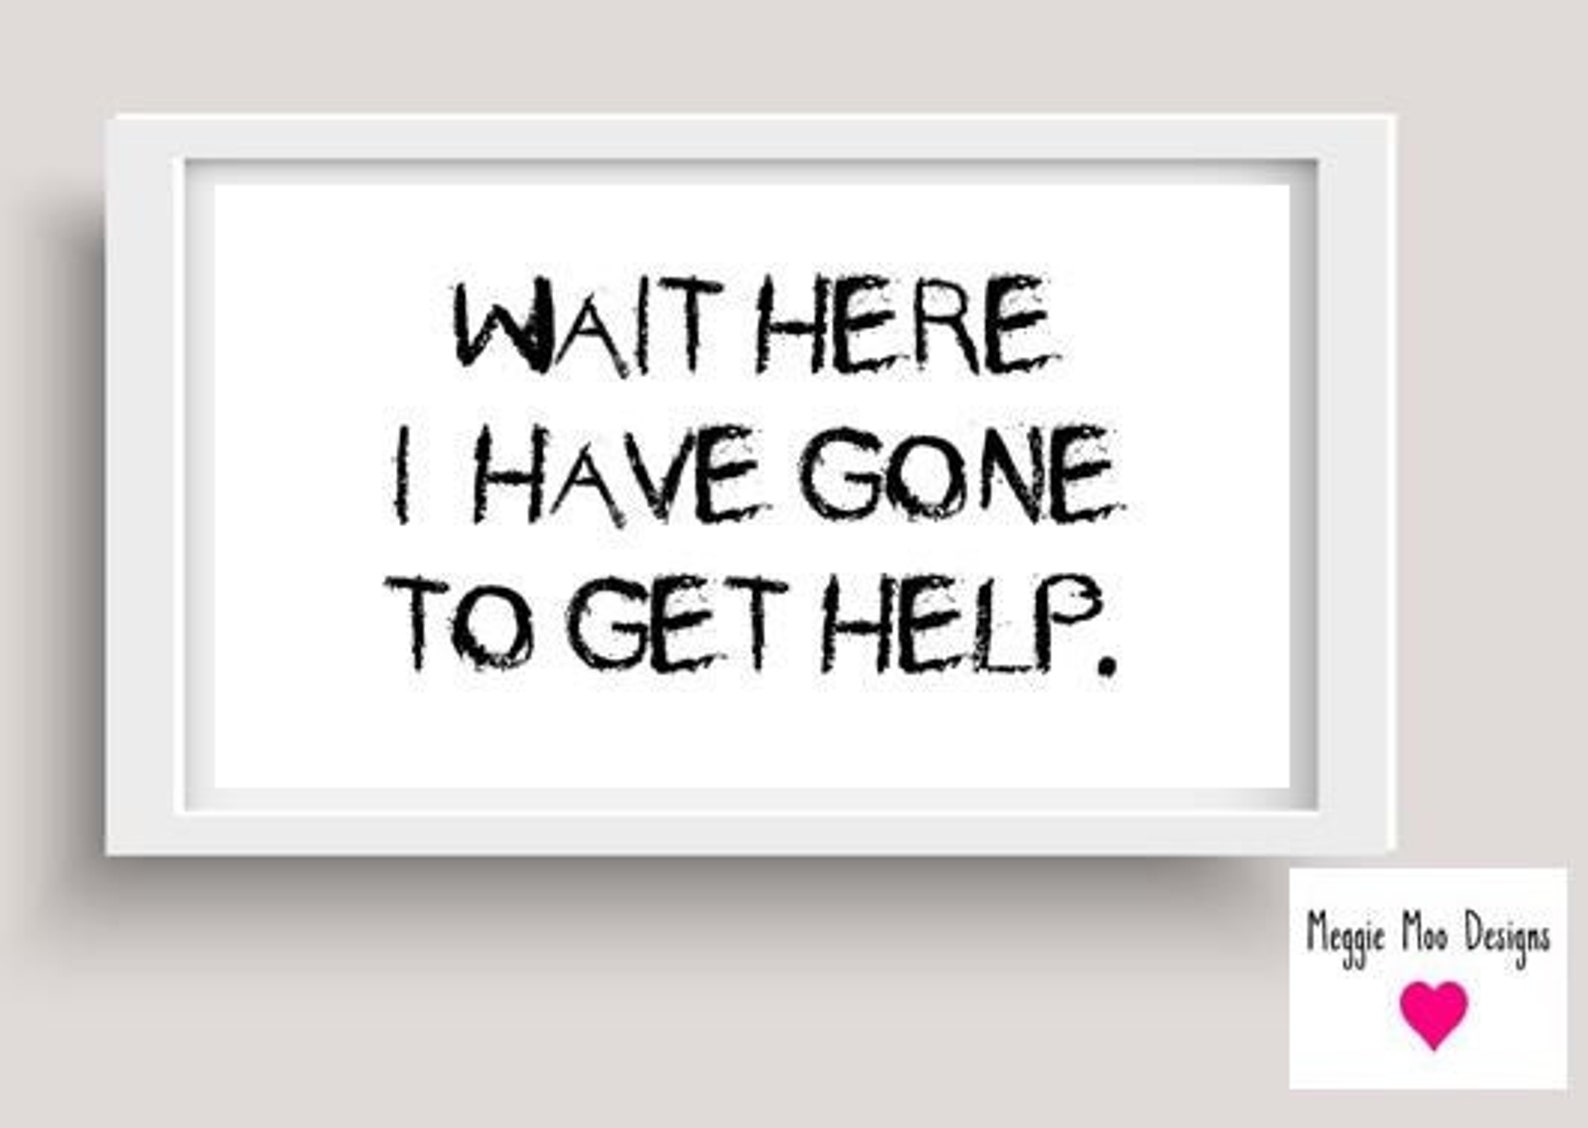 Wait Here I Have Gone to Get Help Print Humourous Print | Etsy